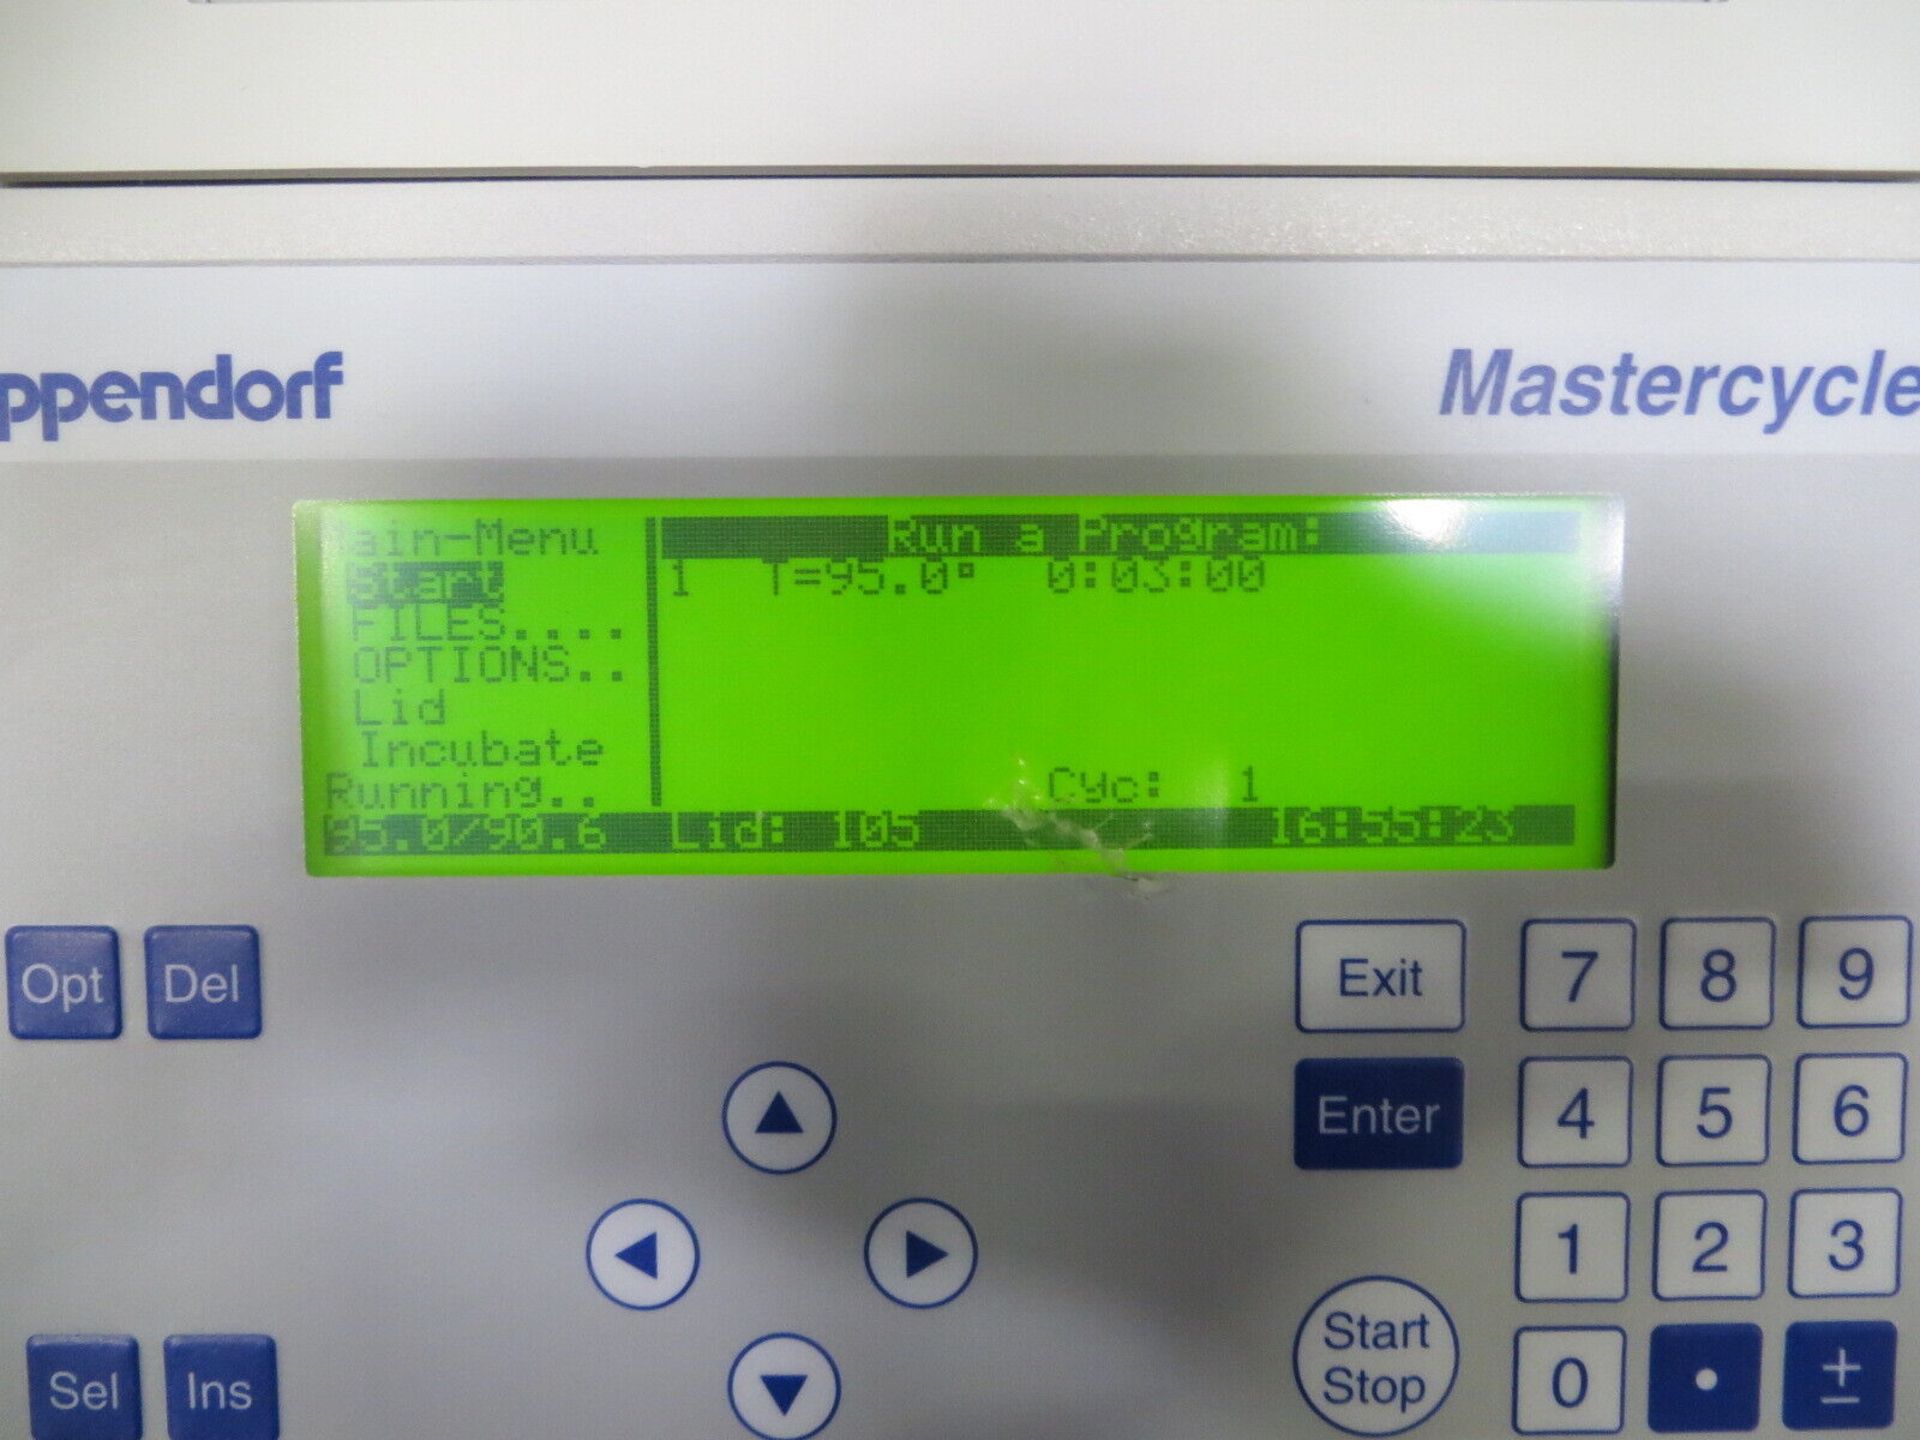 Eppendorf Mastercycler 5333 Thermal Cycler 96-Well Block - Gilroy - Image 4 of 8